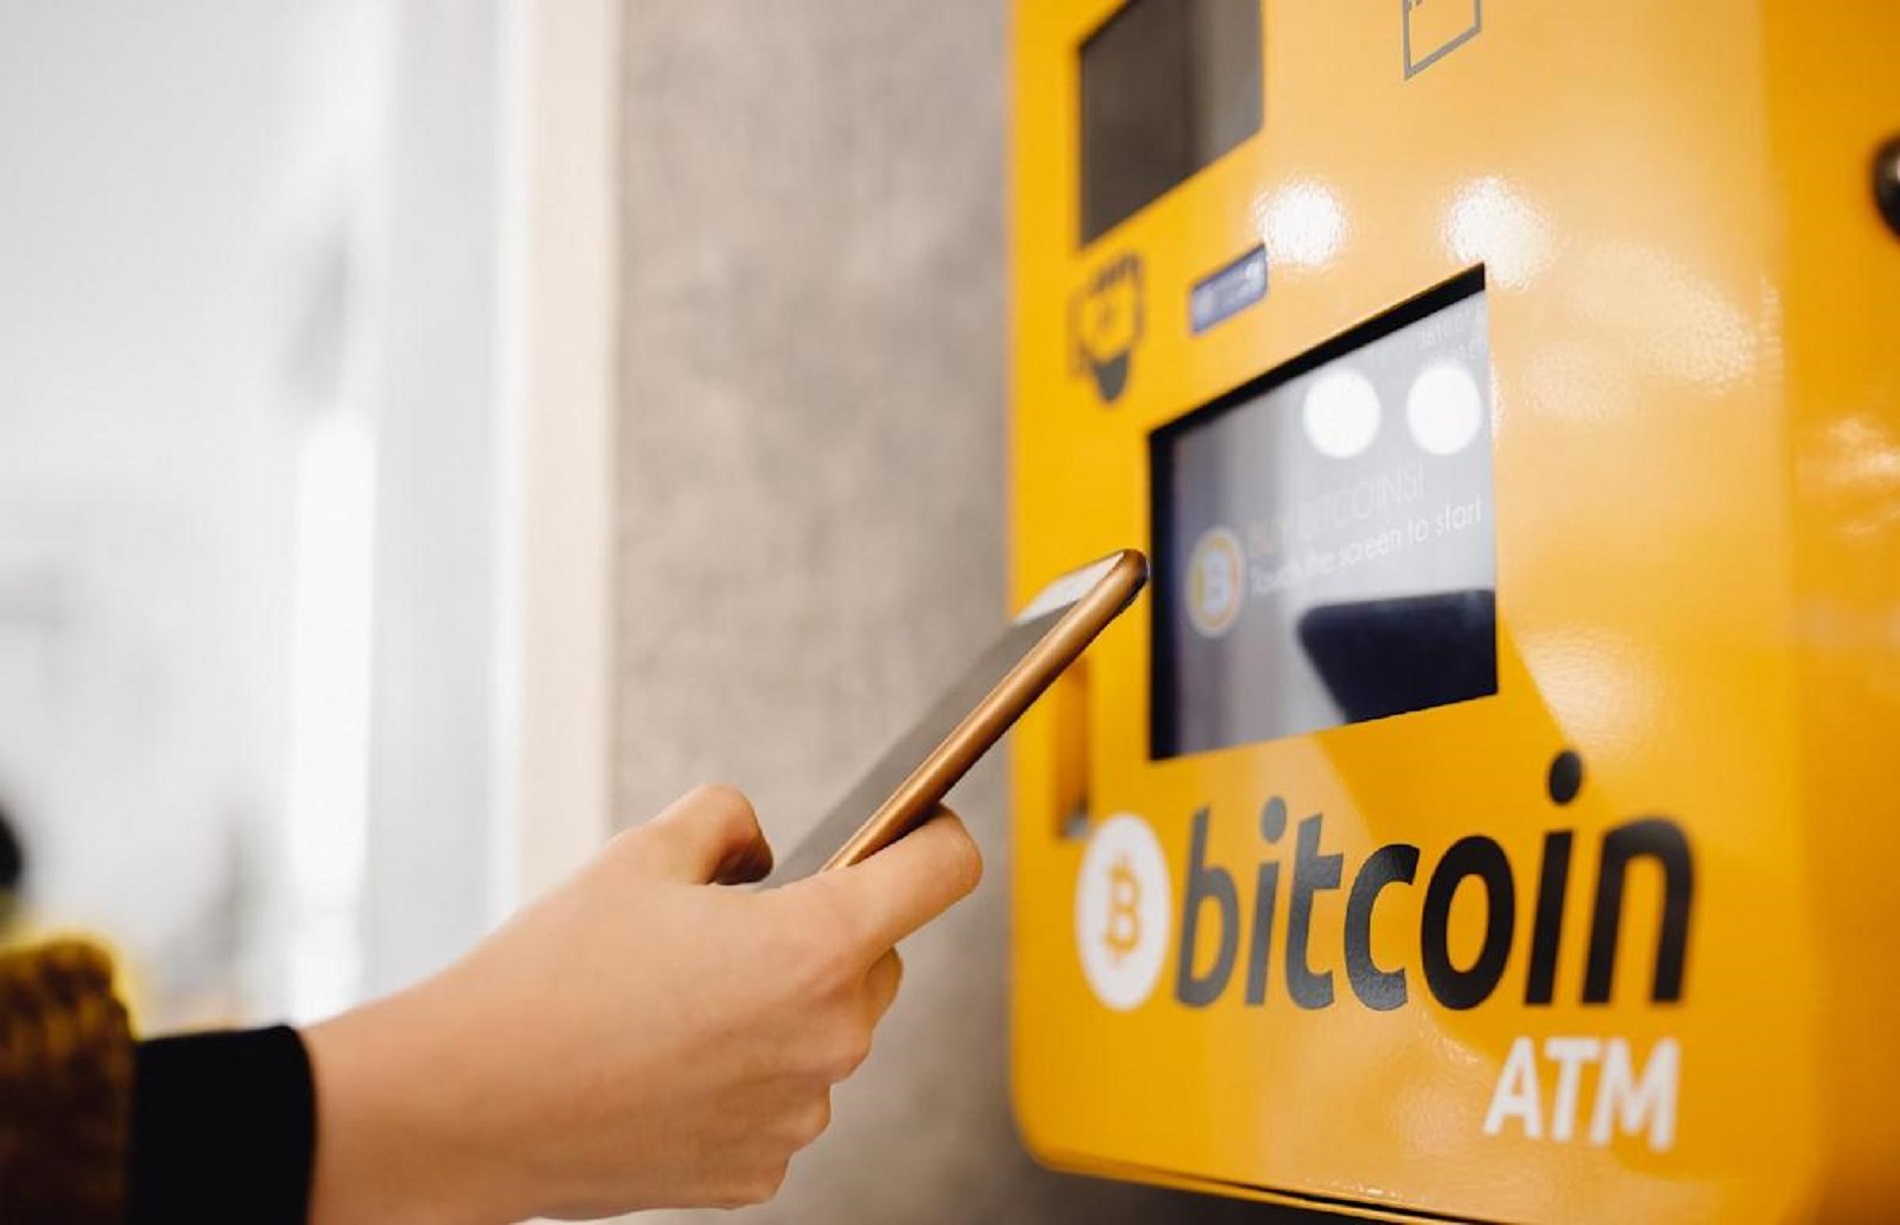 The UK Financial Conduct Authority warned that crypto ATM operators are not allowed to operate in the country